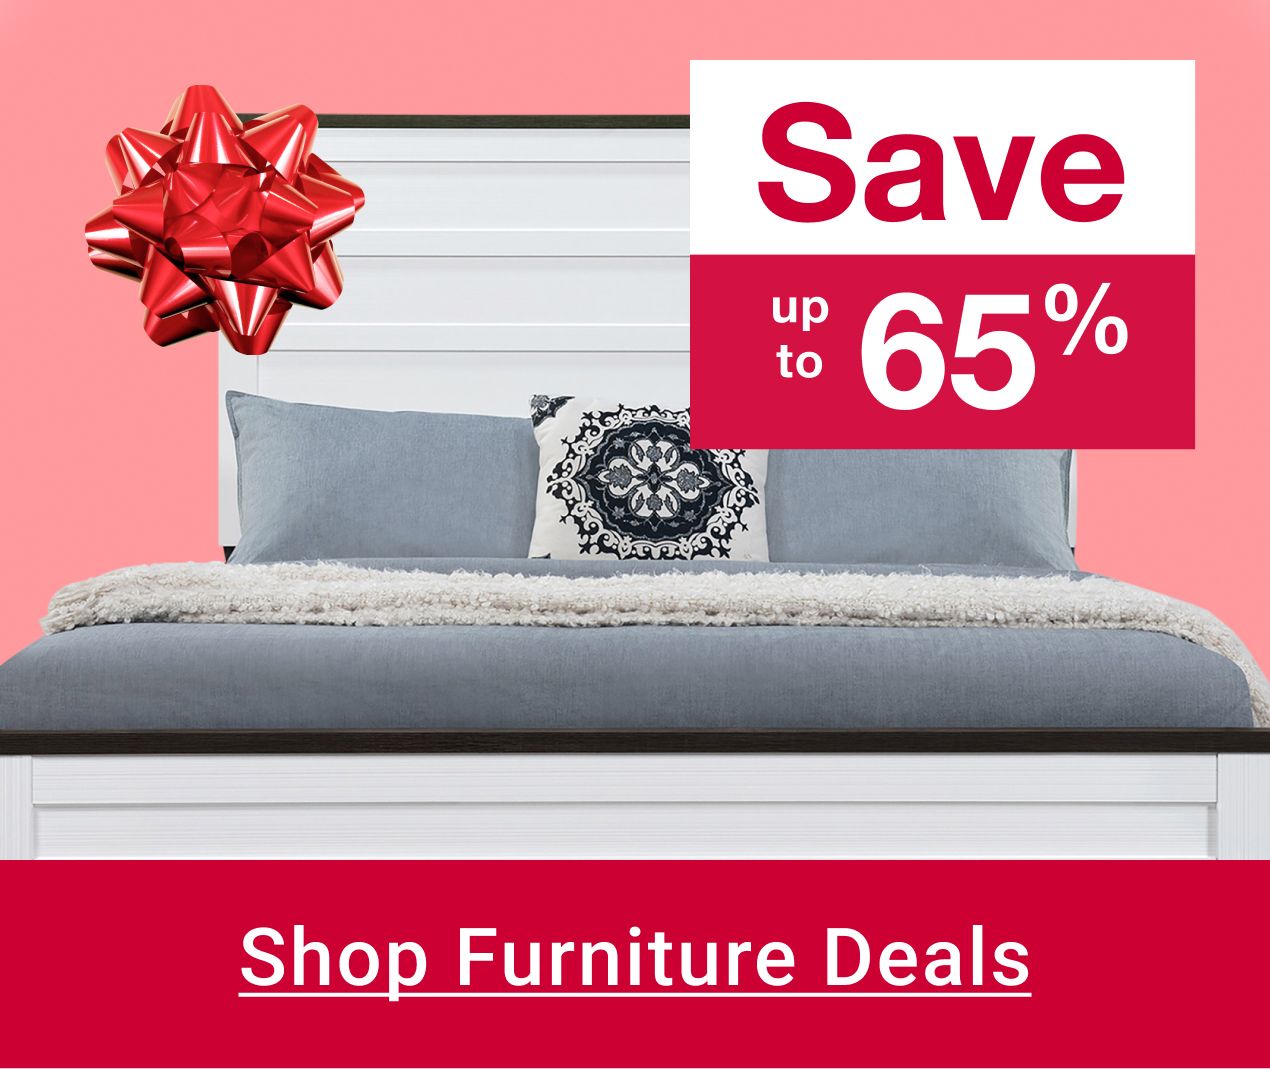 Save on furniture deals. Click to shop now